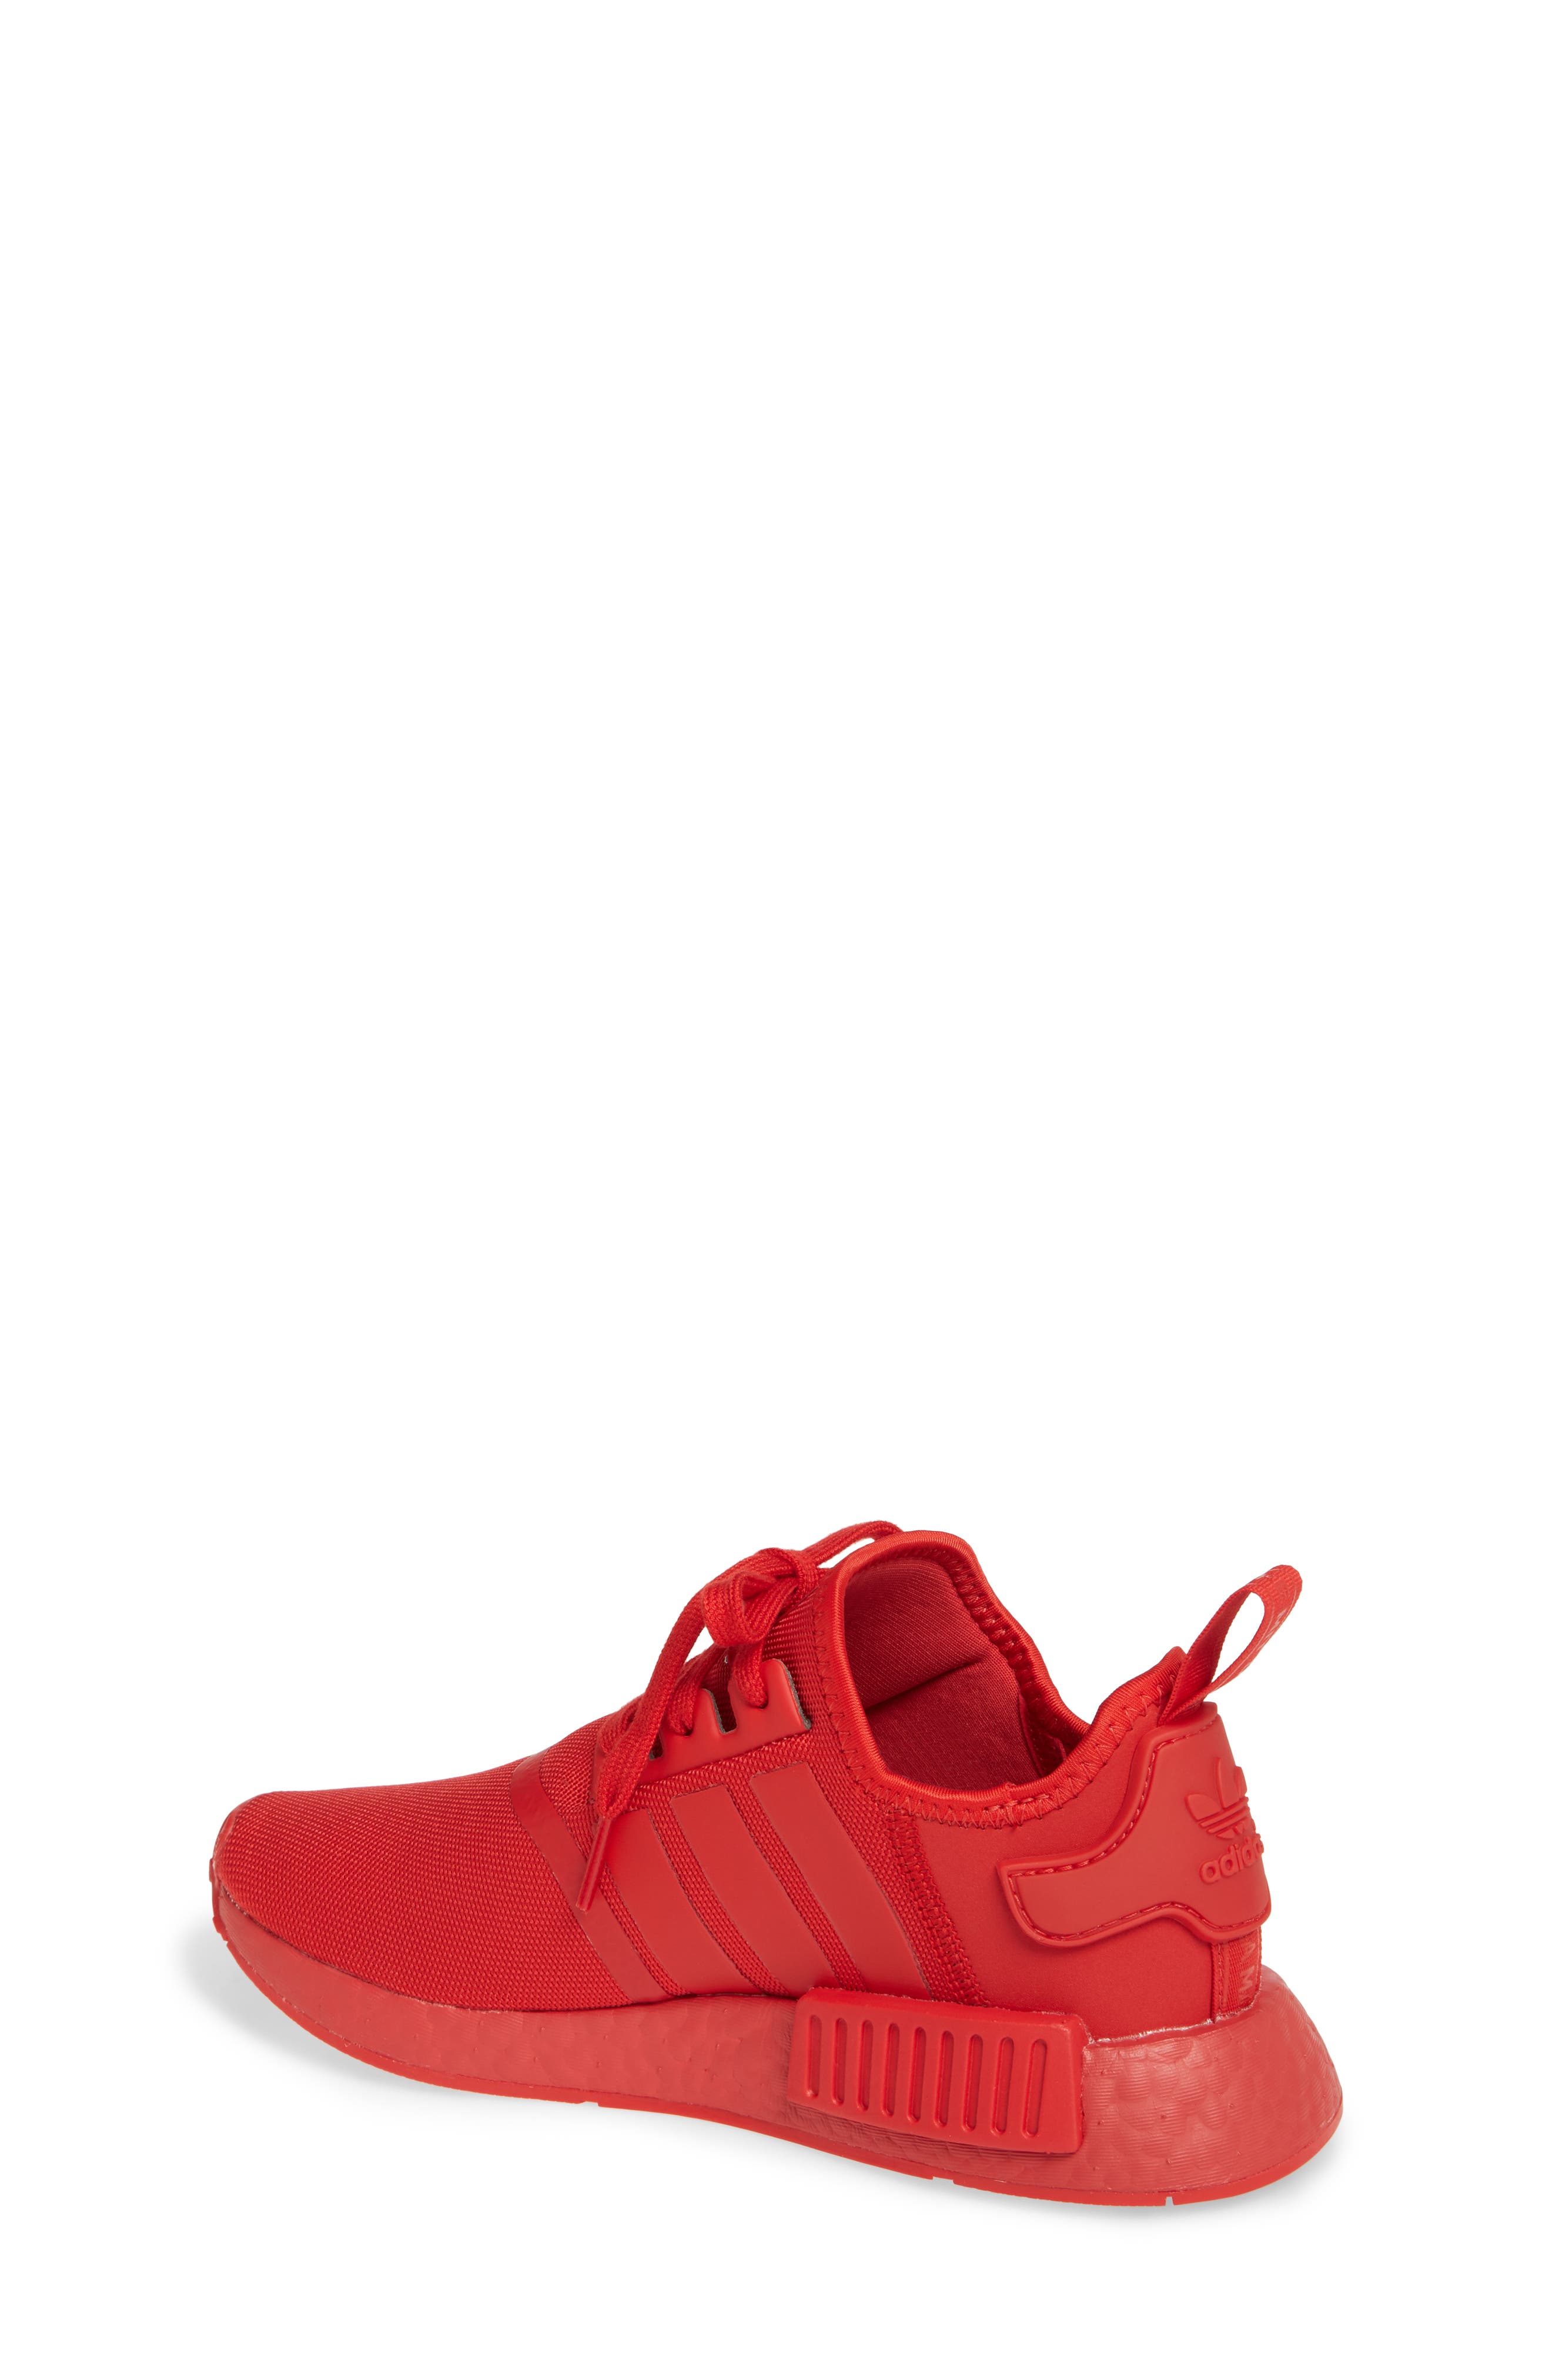 adidas nmd red color